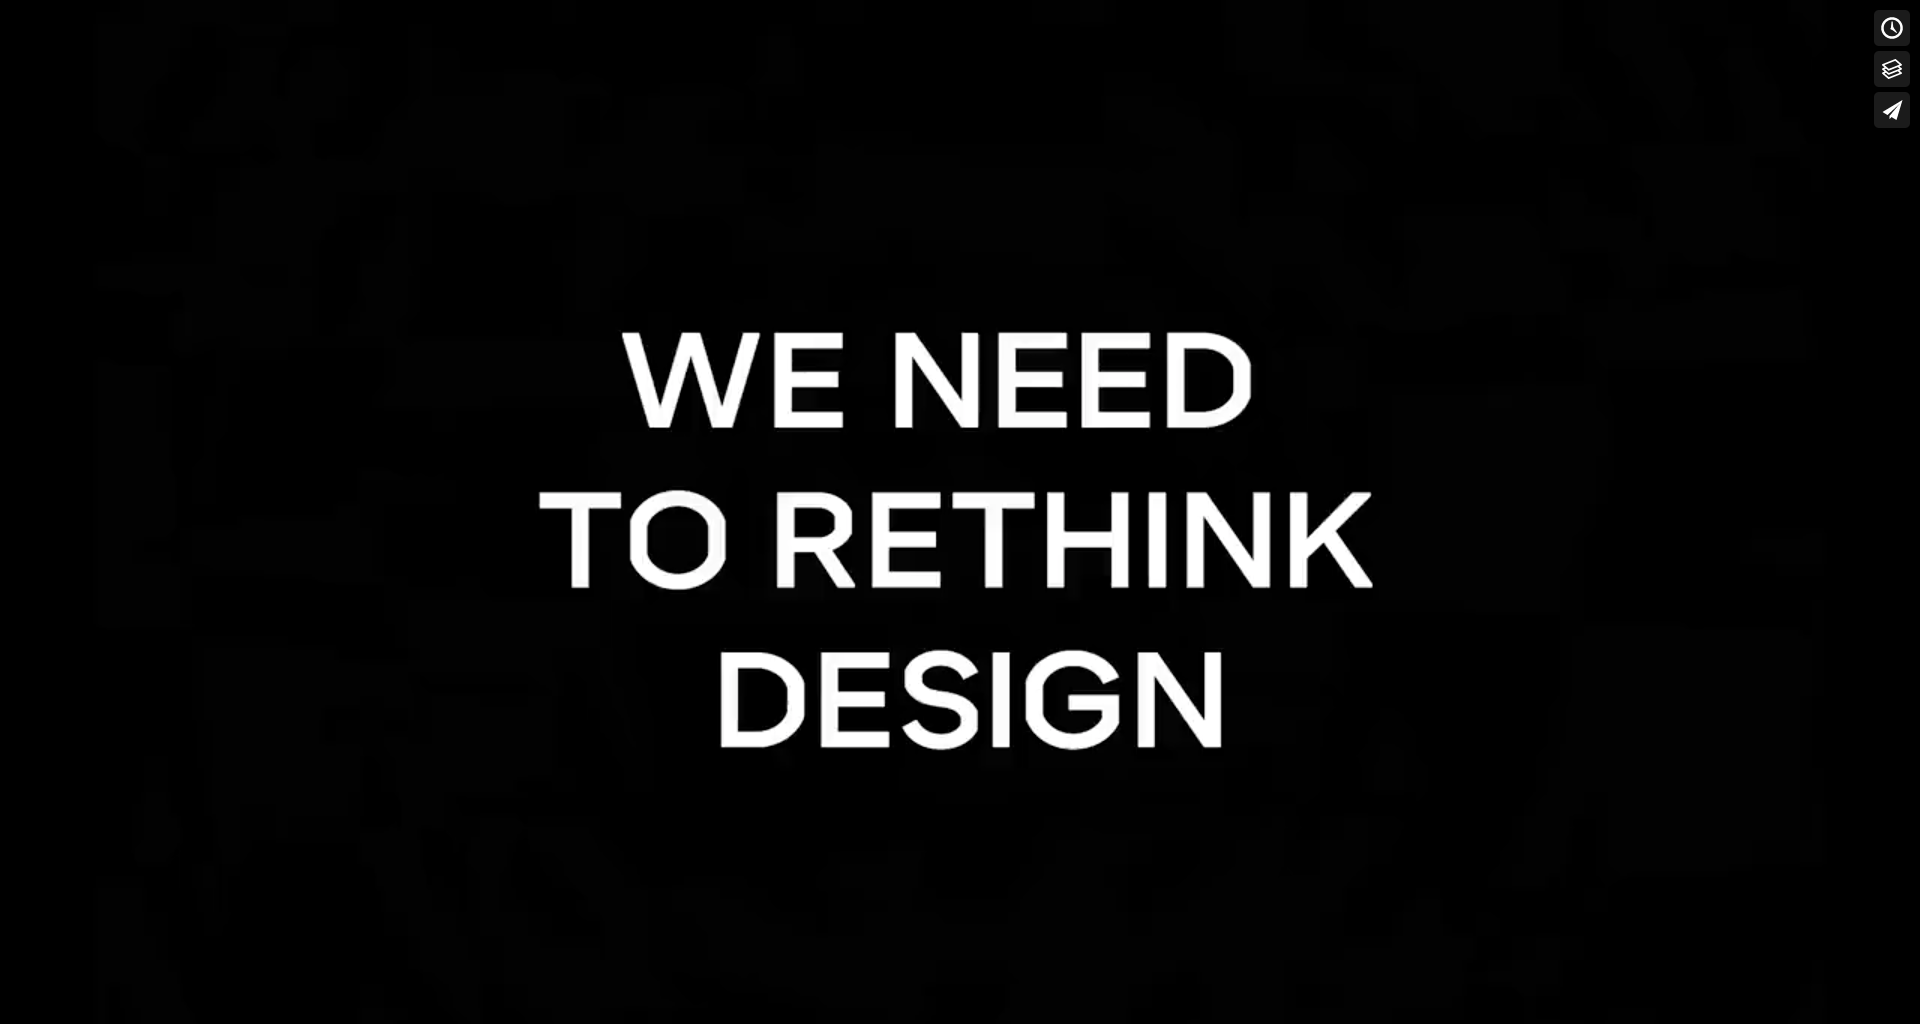 Campaign launch: We need to Rethink Design